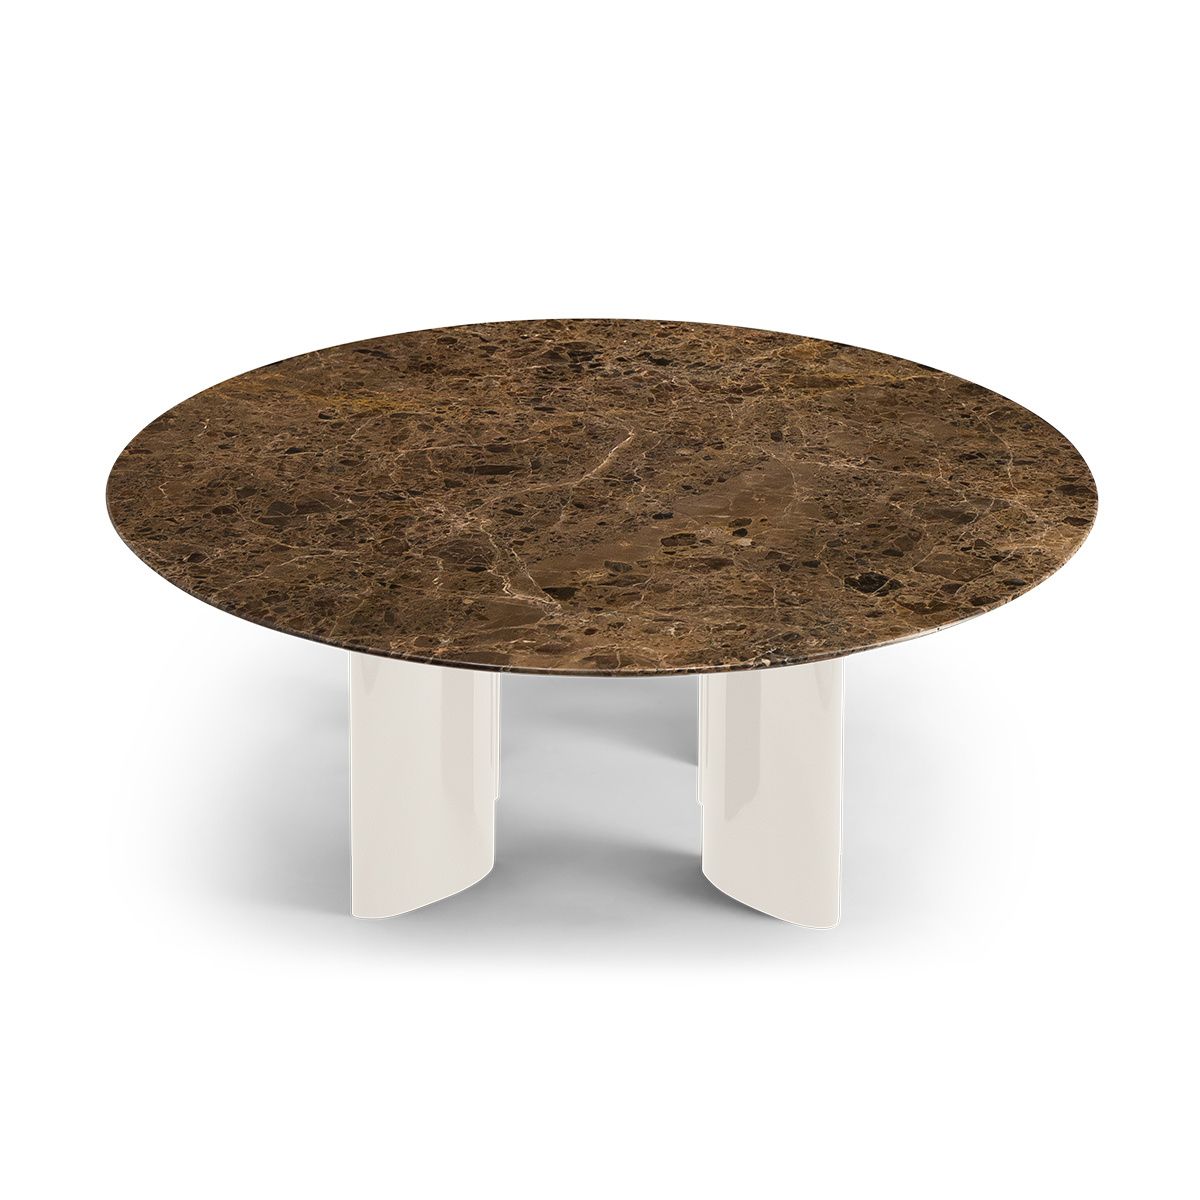 Cream And Brown Marble Coffee Table – Carlotta – The Socialite Family In Marble Coffee Tables (View 17 of 20)